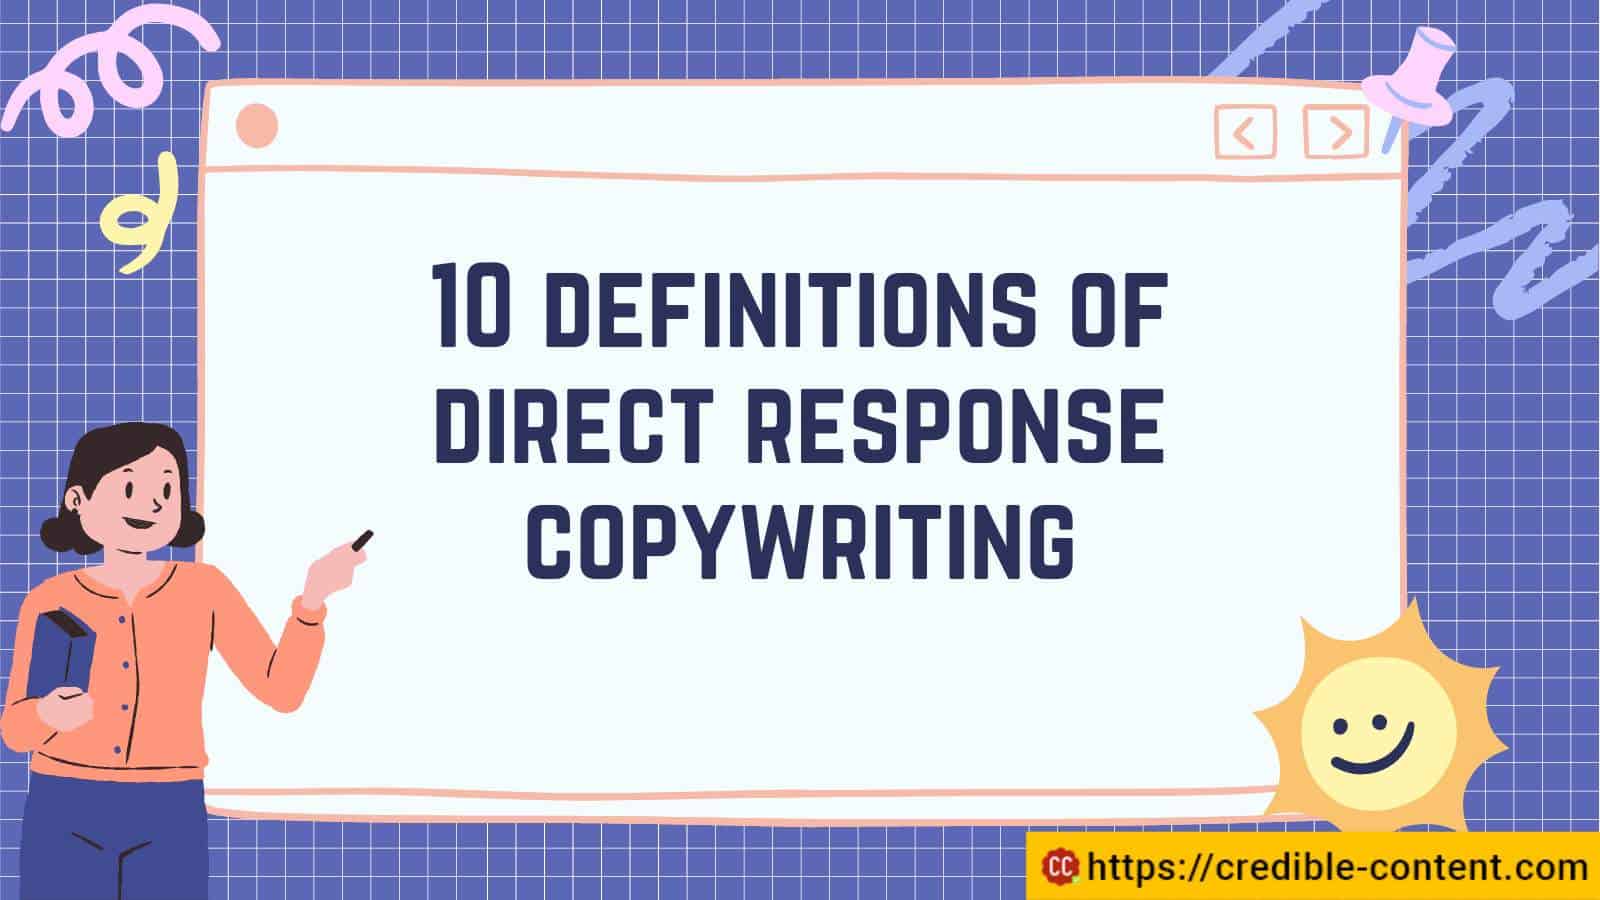 10 definitions of direct response copywriting